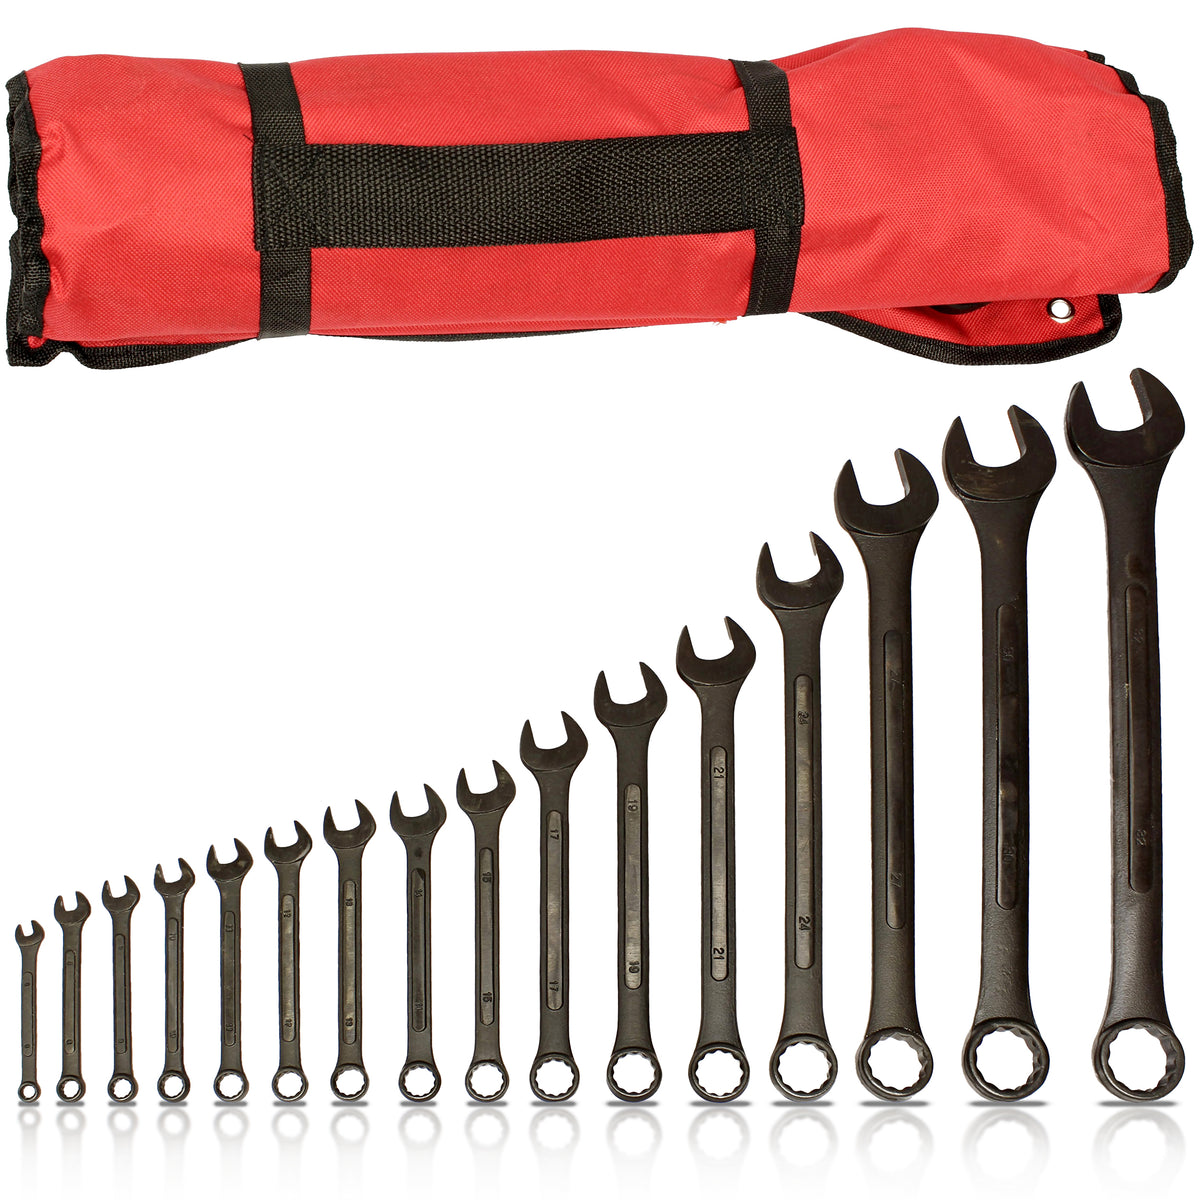 16 Piece Metric Combo Wrench Set with Organizing Wrench Set Roll